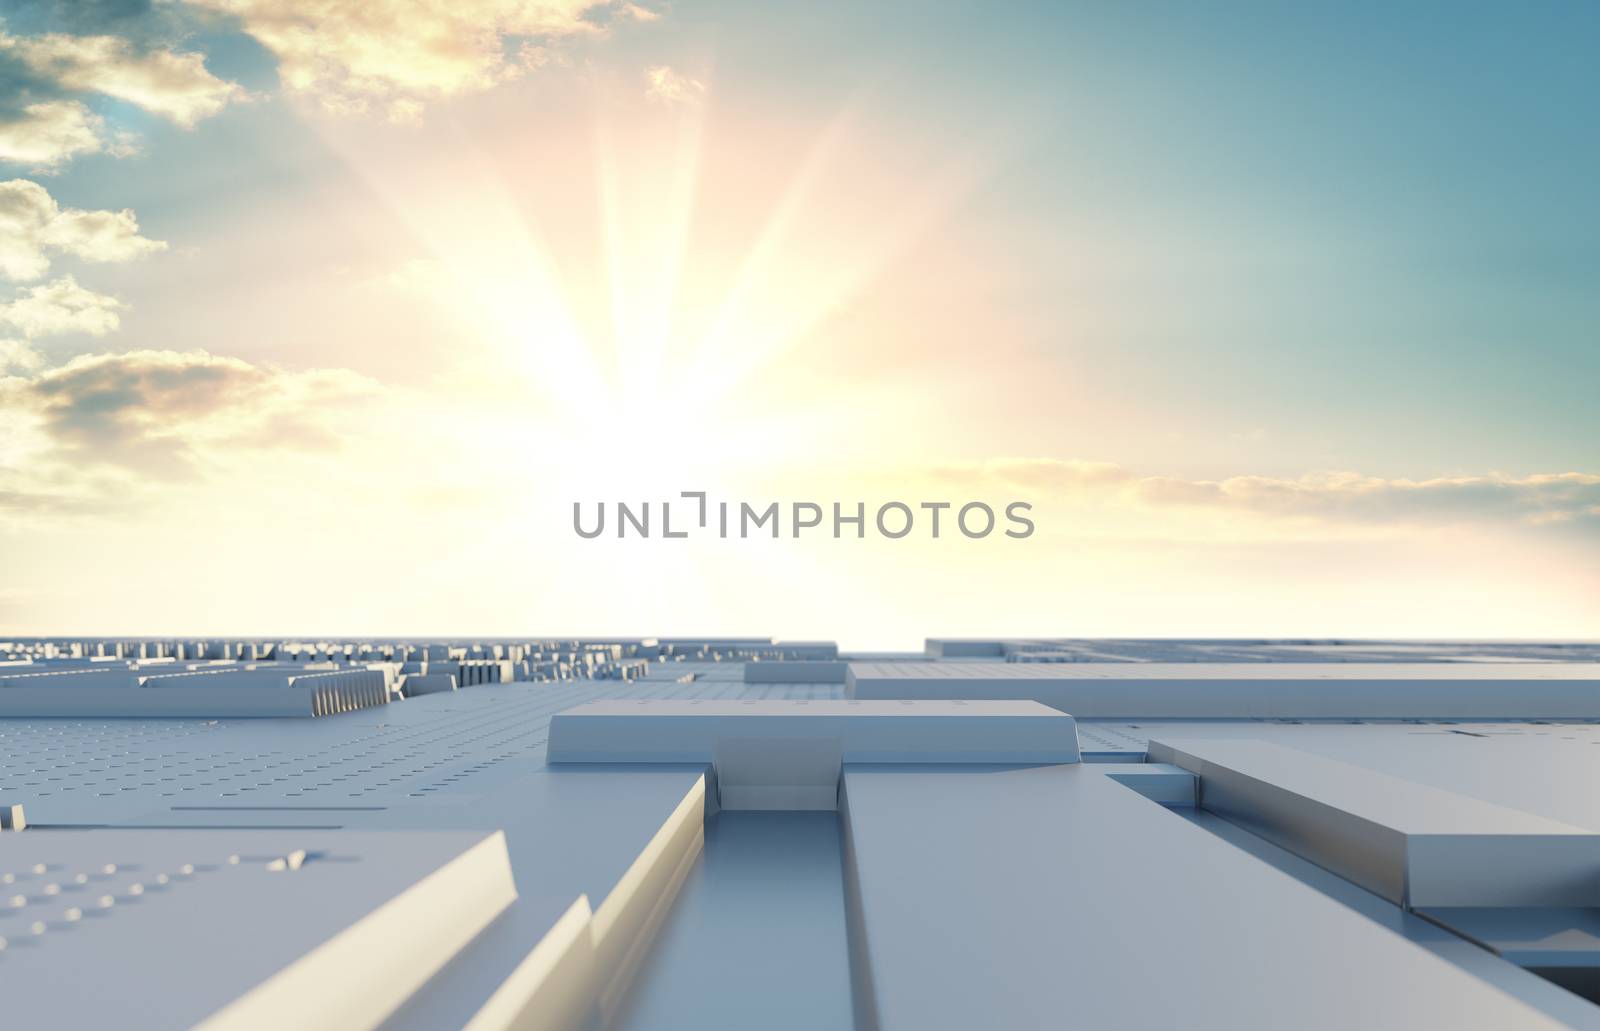 Abstract futuristic surface of a spaceship against the backdrop of dramatic sunset or sunrise. Beautiful background for your tech design. Cubes, reflection. 3D illustration